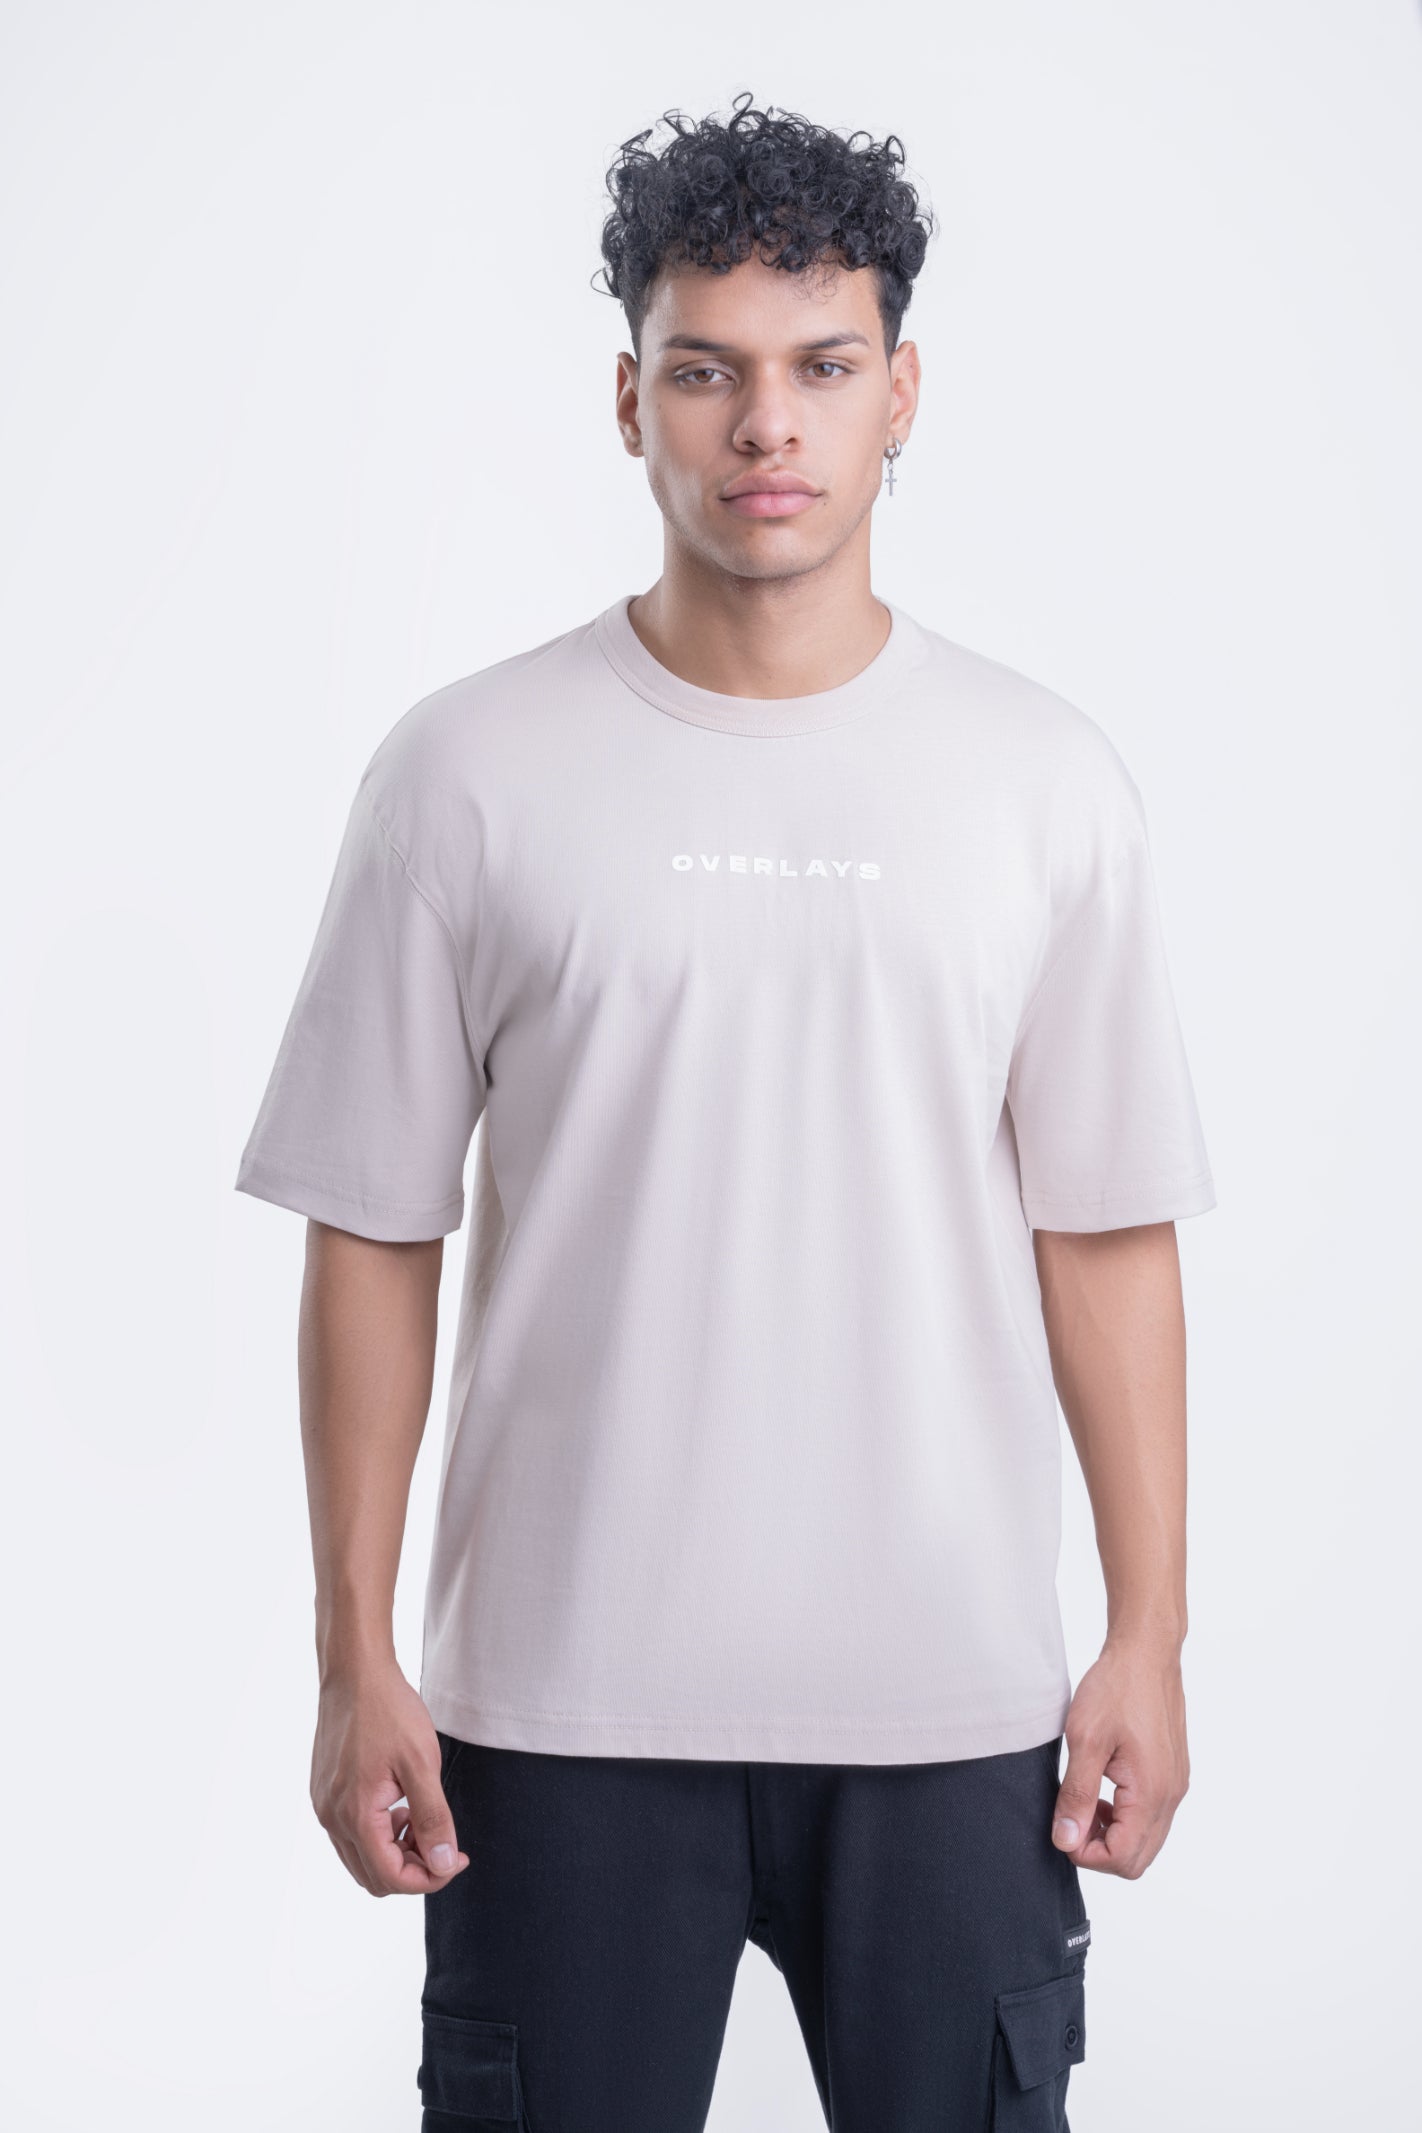 Relaxed Fit Men's Arise Tshirt - Beige